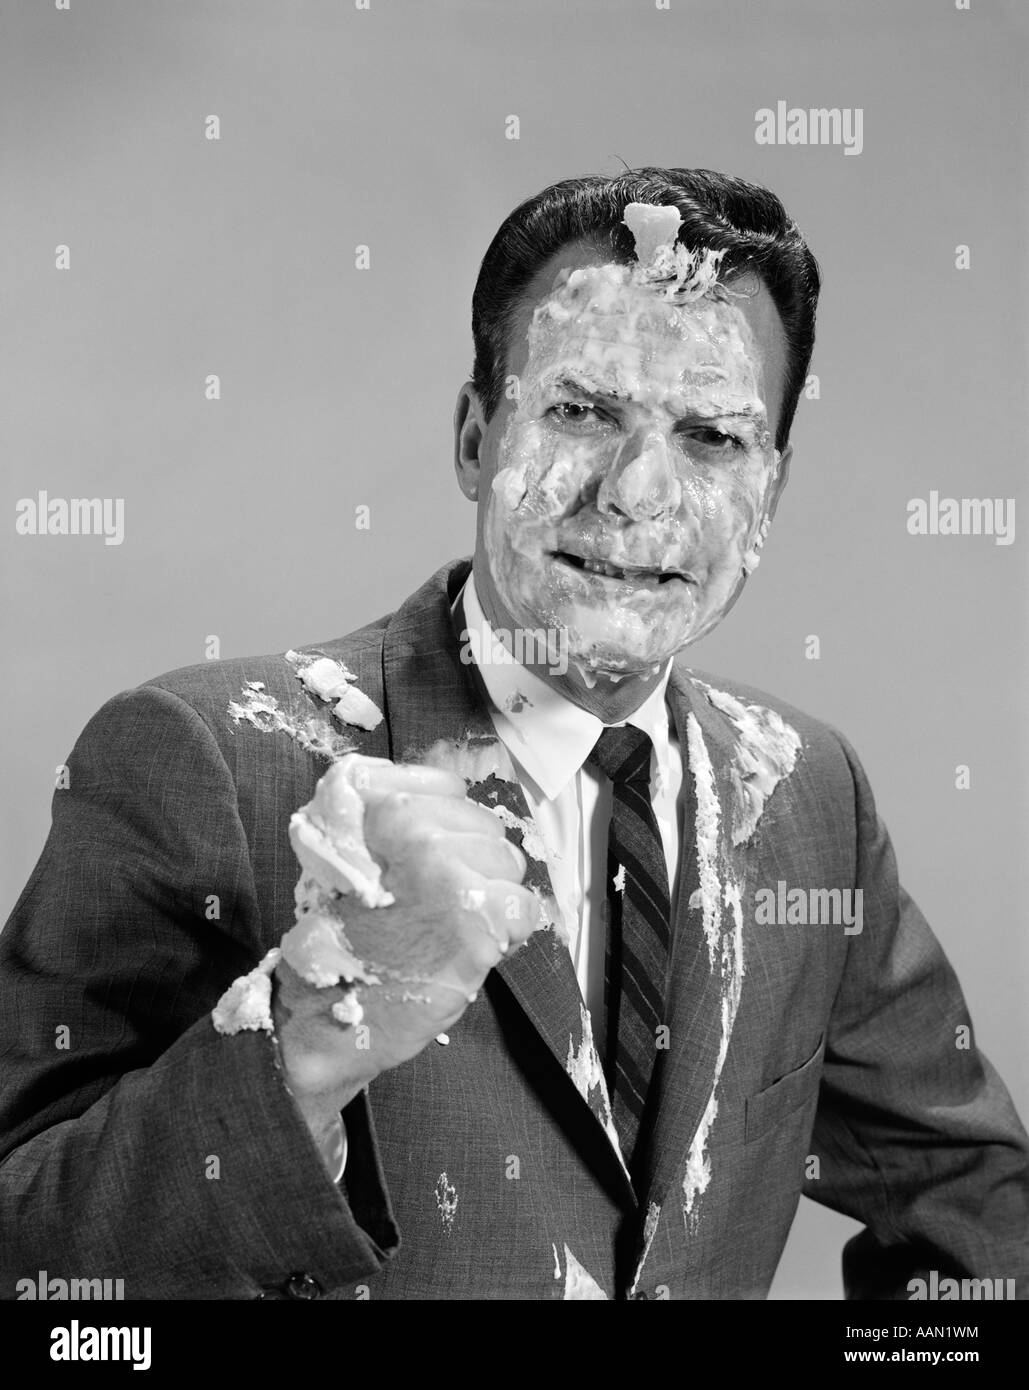 1960s BUSINESSMEN PORTRAIT WITH FOAM ICING SMEARED OVER FACE Stock Photo